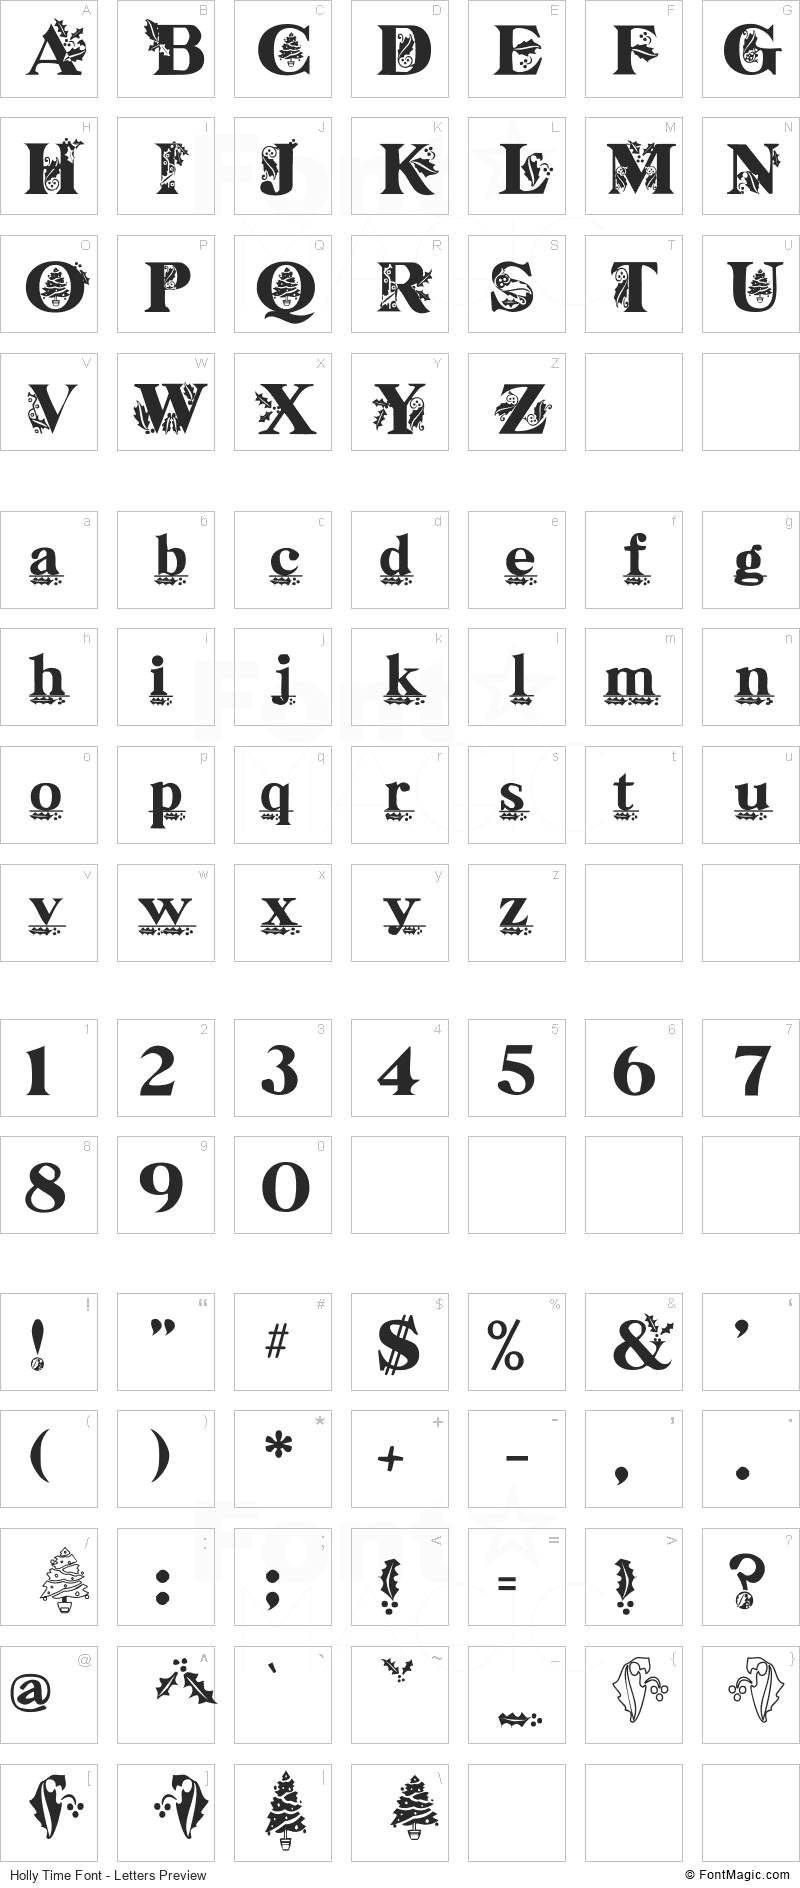 Holly Time Font - All Latters Preview Chart